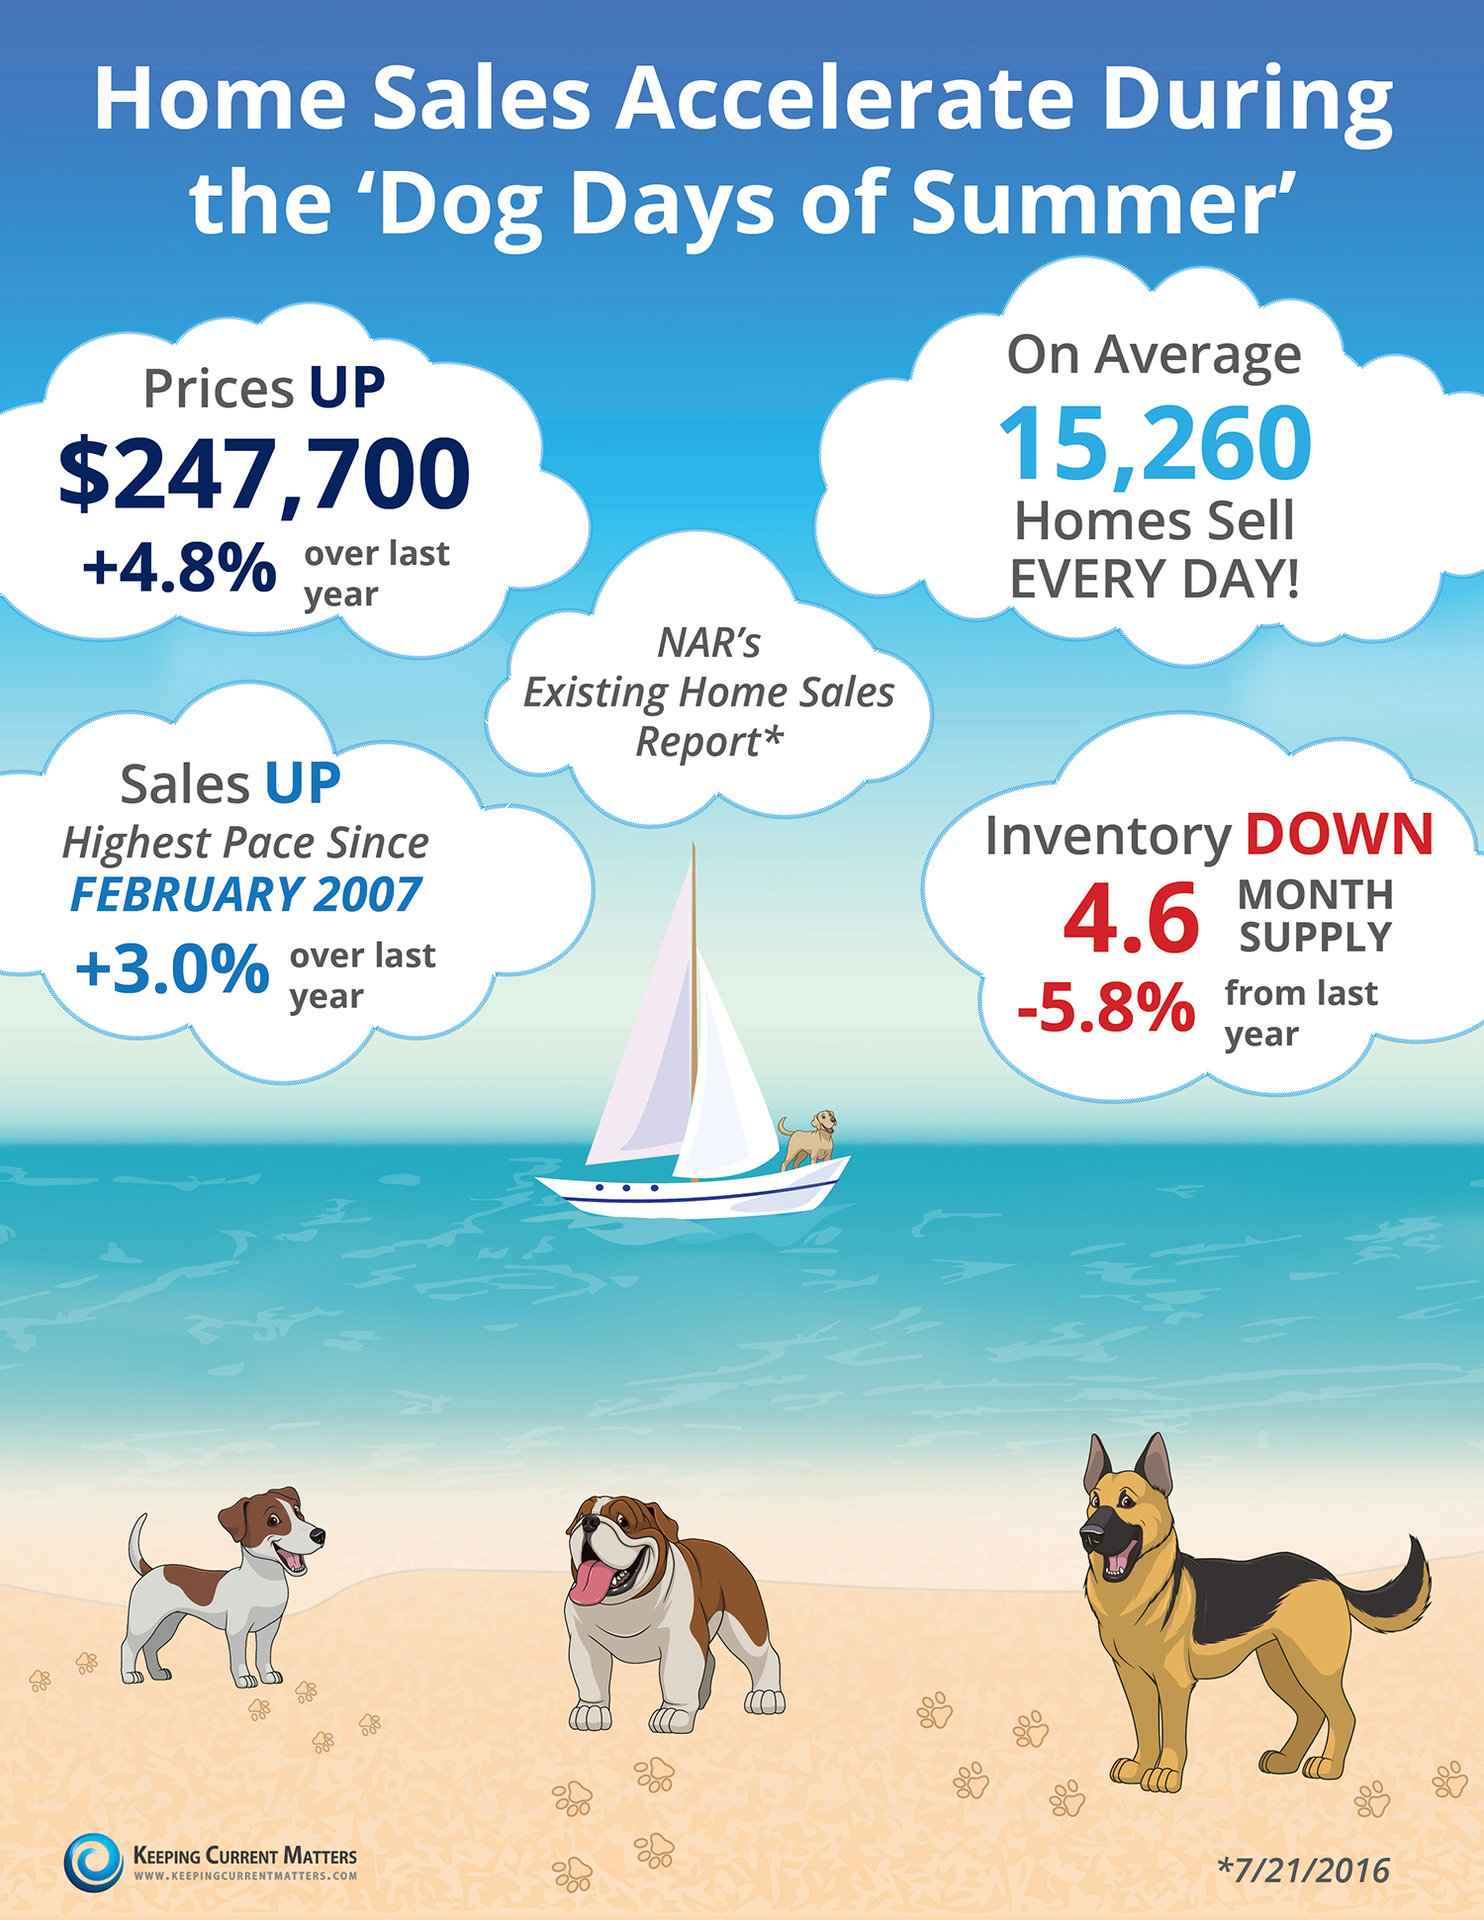 Home Sales Accelerate During The “Dog Days of Summer” [INFOGRAPHIC] | Keeping Current Matters